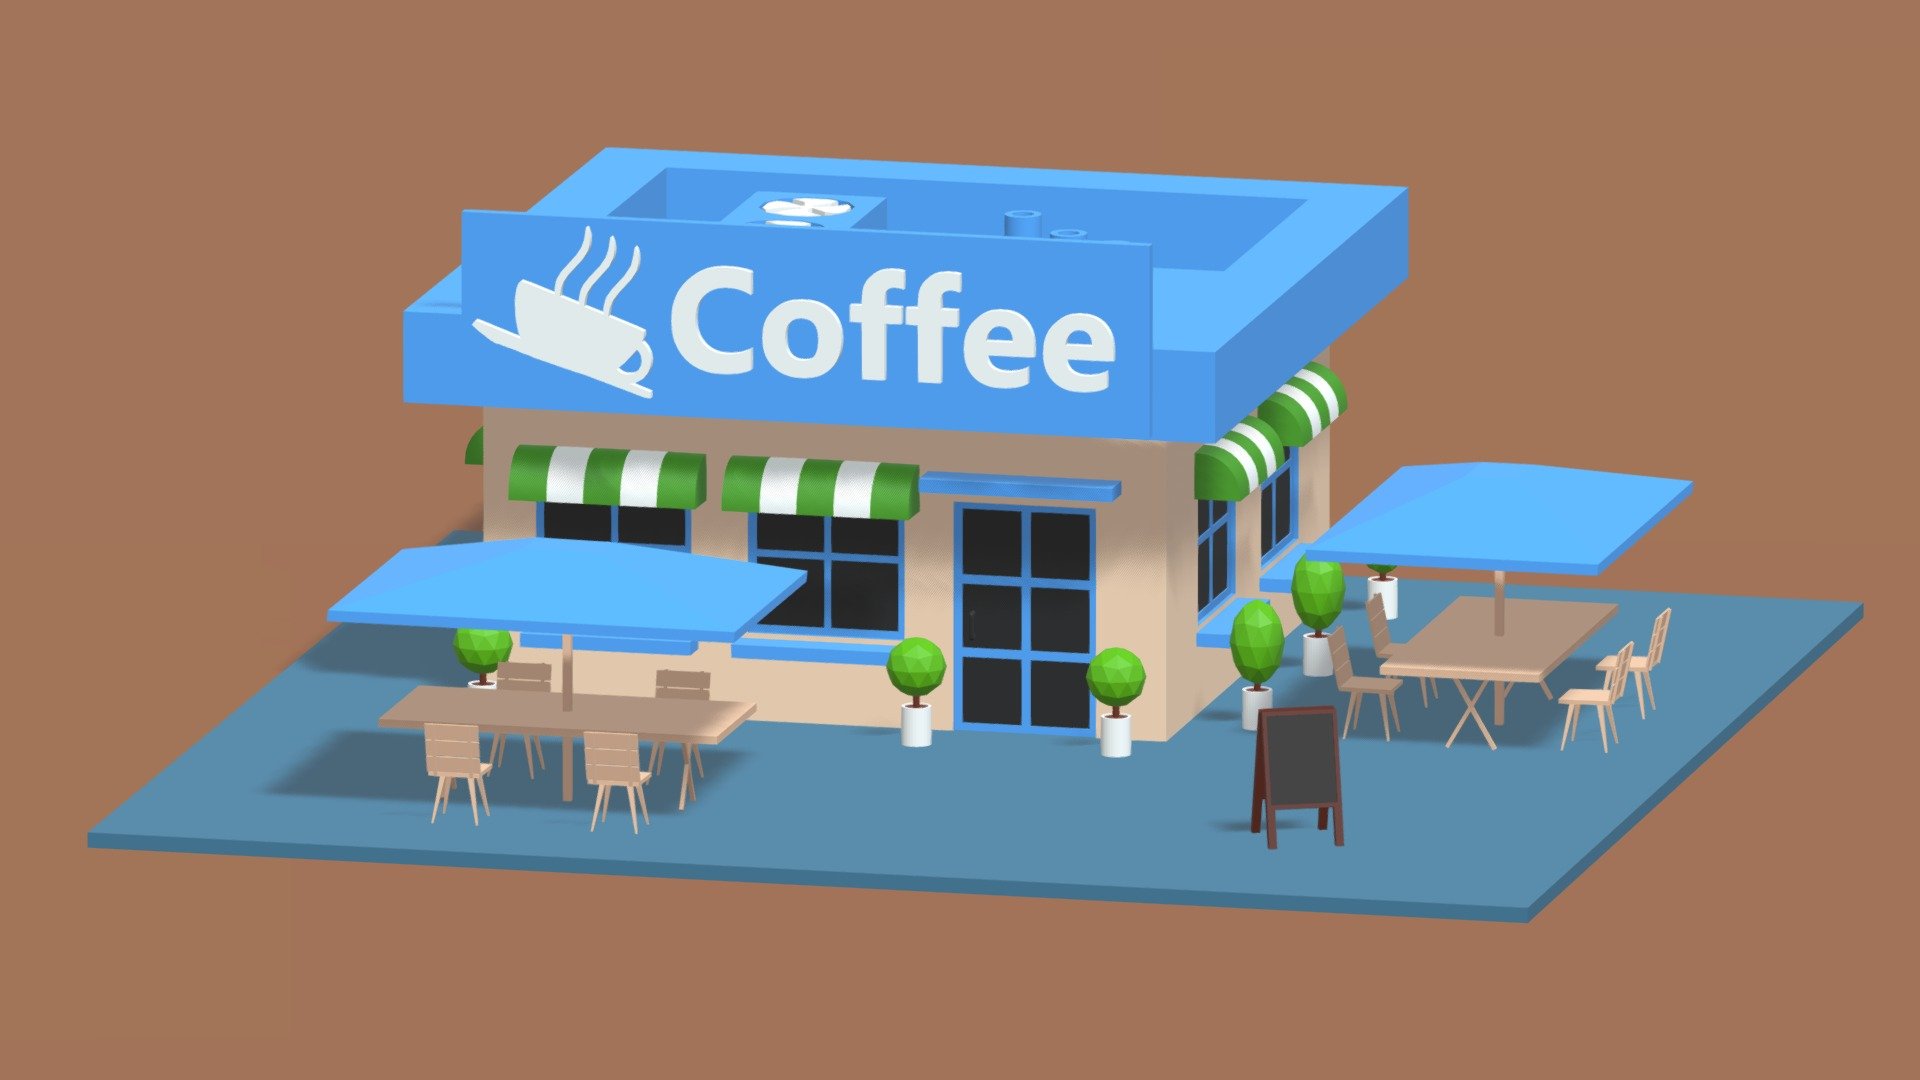 -Cartoon Coffee Shop Cafe.

-This product contains 25 objects.

-Total vert: 6,413, poly: 6,389.

-Materials have the correct names.

-This product was created in Blender 2.8.

-Formats: blend, fbx, obj, c4d, dae, abc, stl, glb, unity.

-We hope you enjoy this model.

-Thank you 3d model